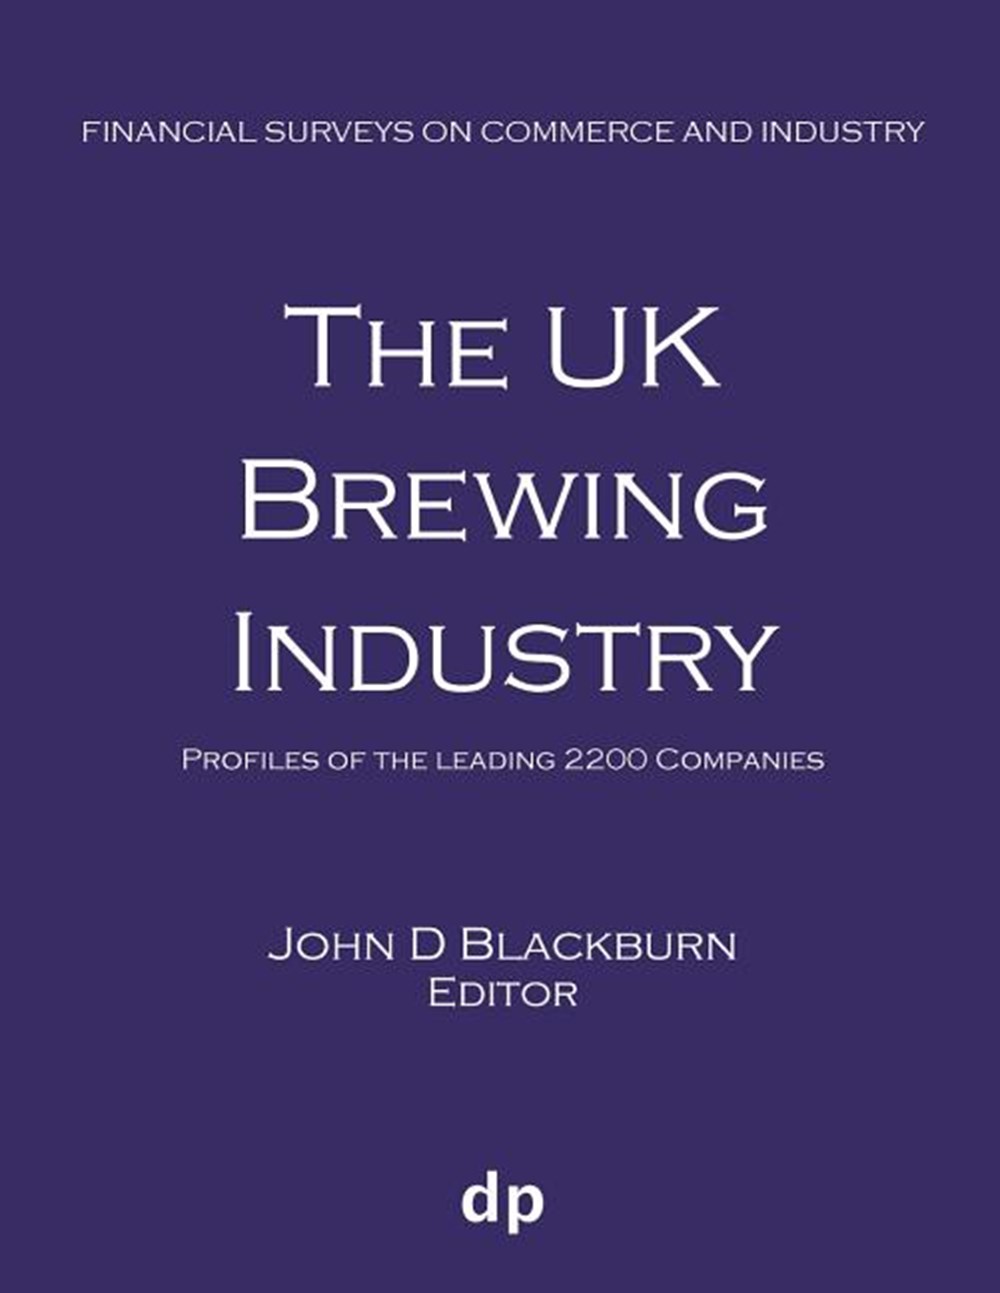 UK Brewing Industry: Profiles of the leading 2200 companies (Spring 2019)